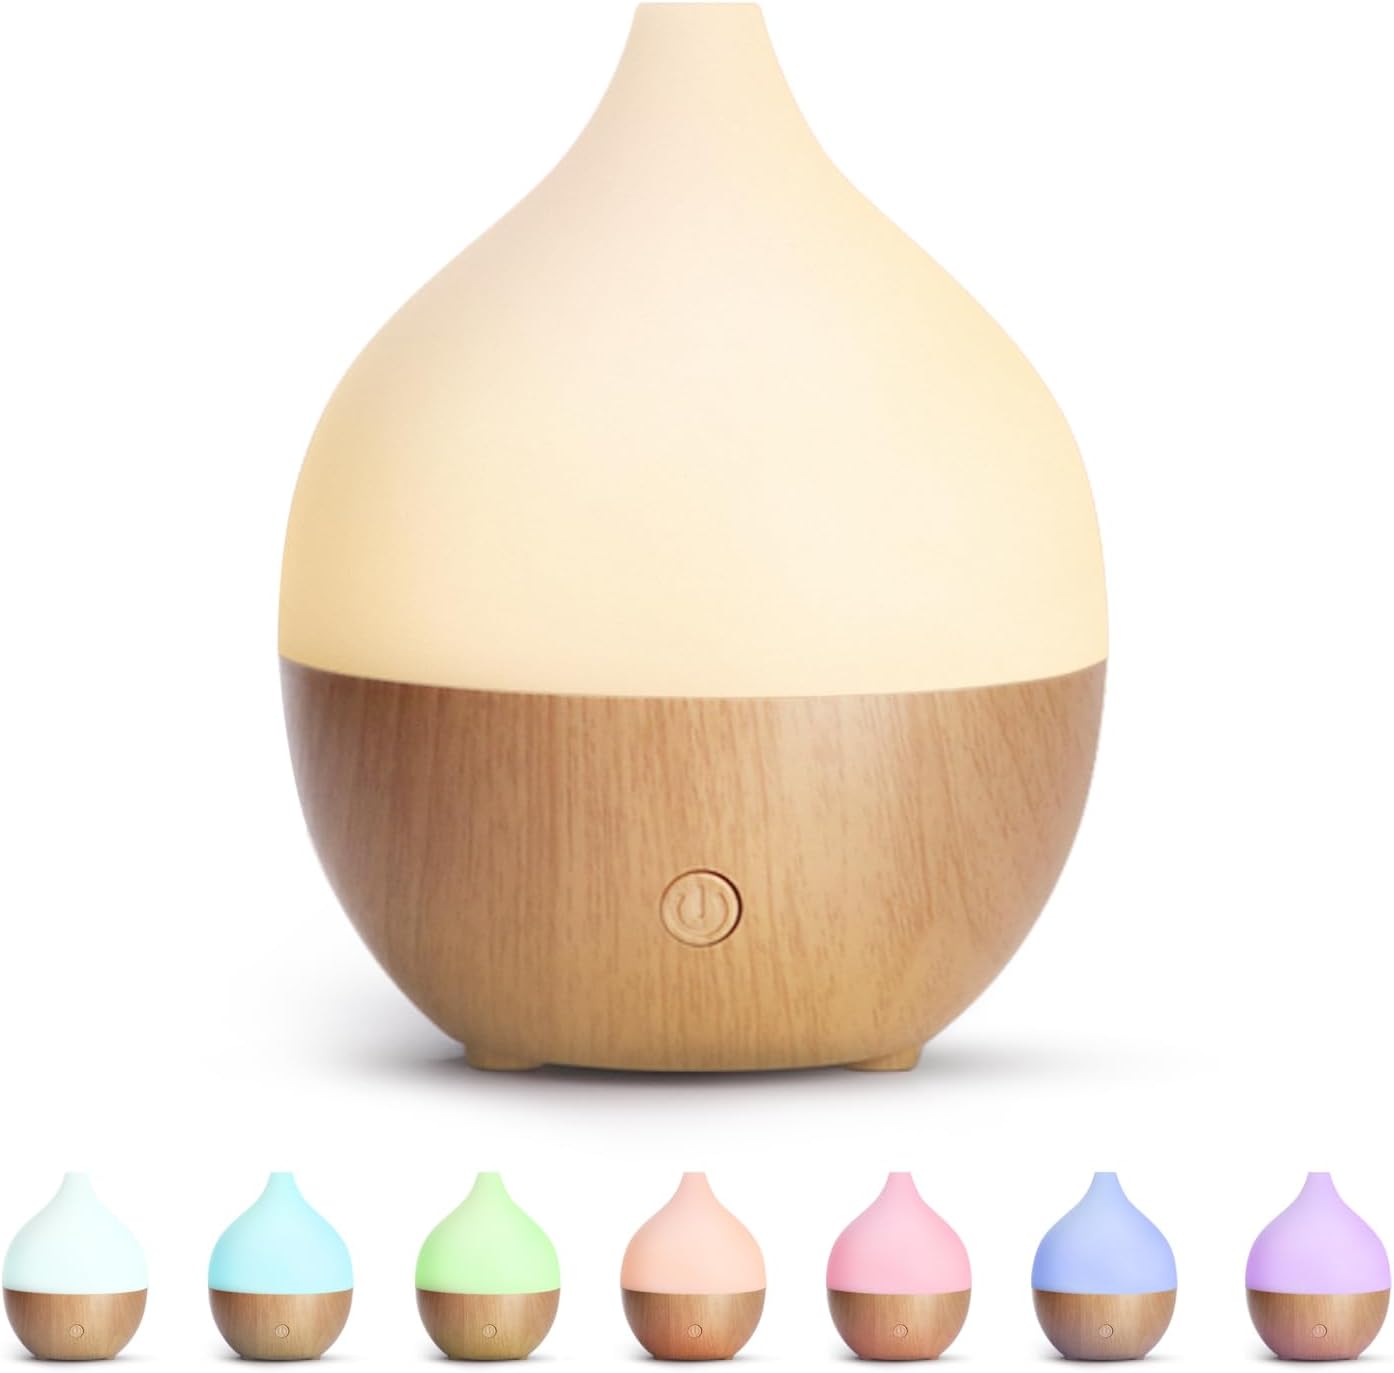 This diffuser is so cute and works beautifully! I dont usually write reviews but I have enjoyed this product so much I thought it would be important to write a review so others looking for a diffuser would be able to enjoy it too.I was worried that it wouldnt be that great based on the price but it has exceeded my expectations.Fun colors, very good looking, quiet, and works so well!